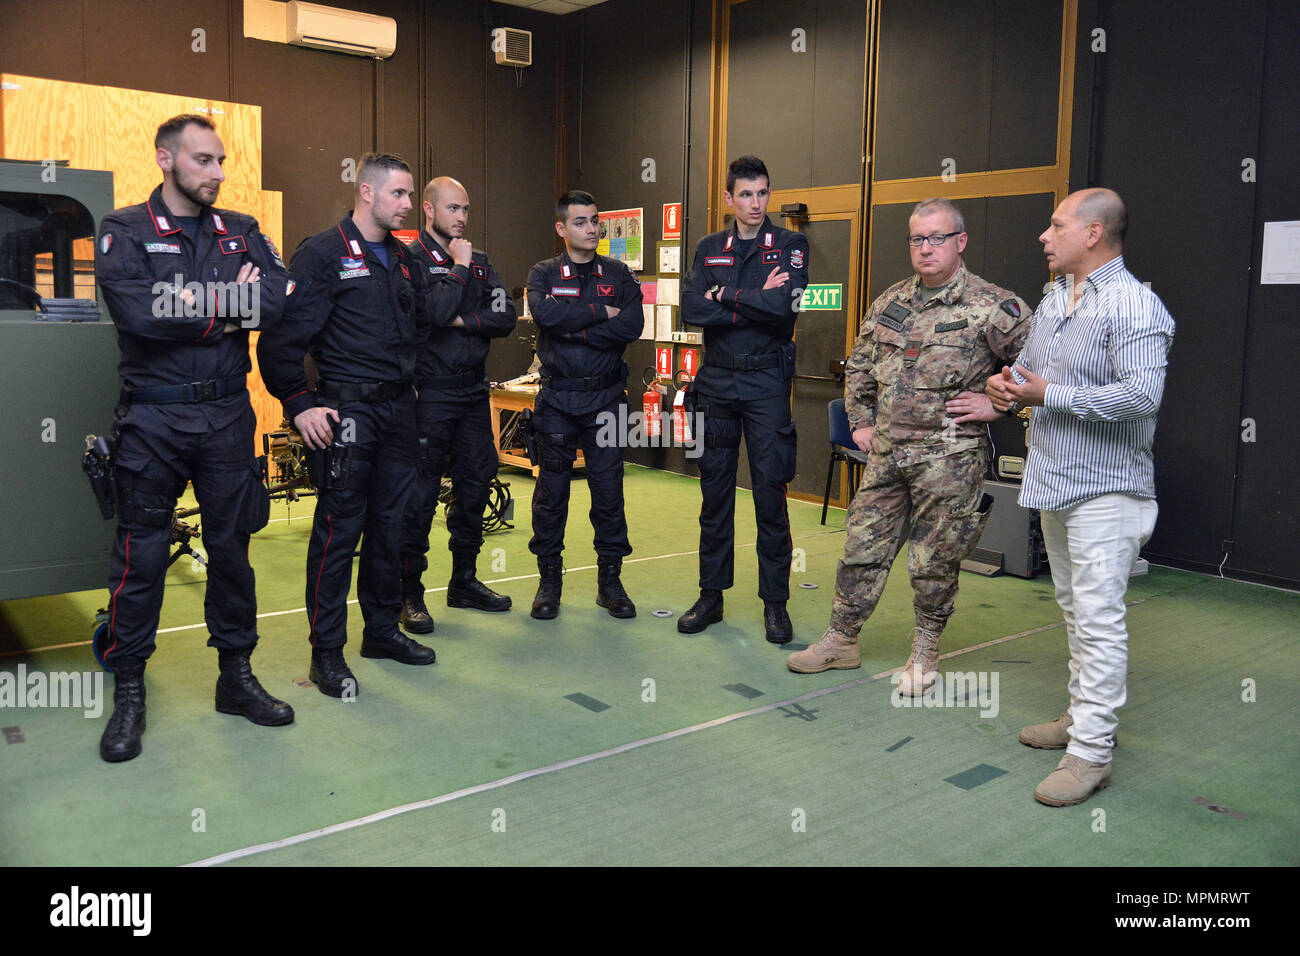 Joseph Gallegos, Training Specialist, Training Support Center Italy, shows the Engagement Skills Trainer (EST) to the Italian Carabinieri of the 13th Regiment Carabinieri “ Friuli Venezia Giulia” Gorizia, during the training at Caserma Ederle, April 3, 2017, Vicenza, Italy. Carabinieri use U.S. Army RTSD South equipment to enhance bilateral relations and to expand levels of cooperation and the capacity of the personnel involved in joint operations. (U.S. Army photo by Visual Information Specialist Paolo Bovo/released) (U.S. Army photo by Visual Information Specialist Paolo Bovo/Released) Stock Photo